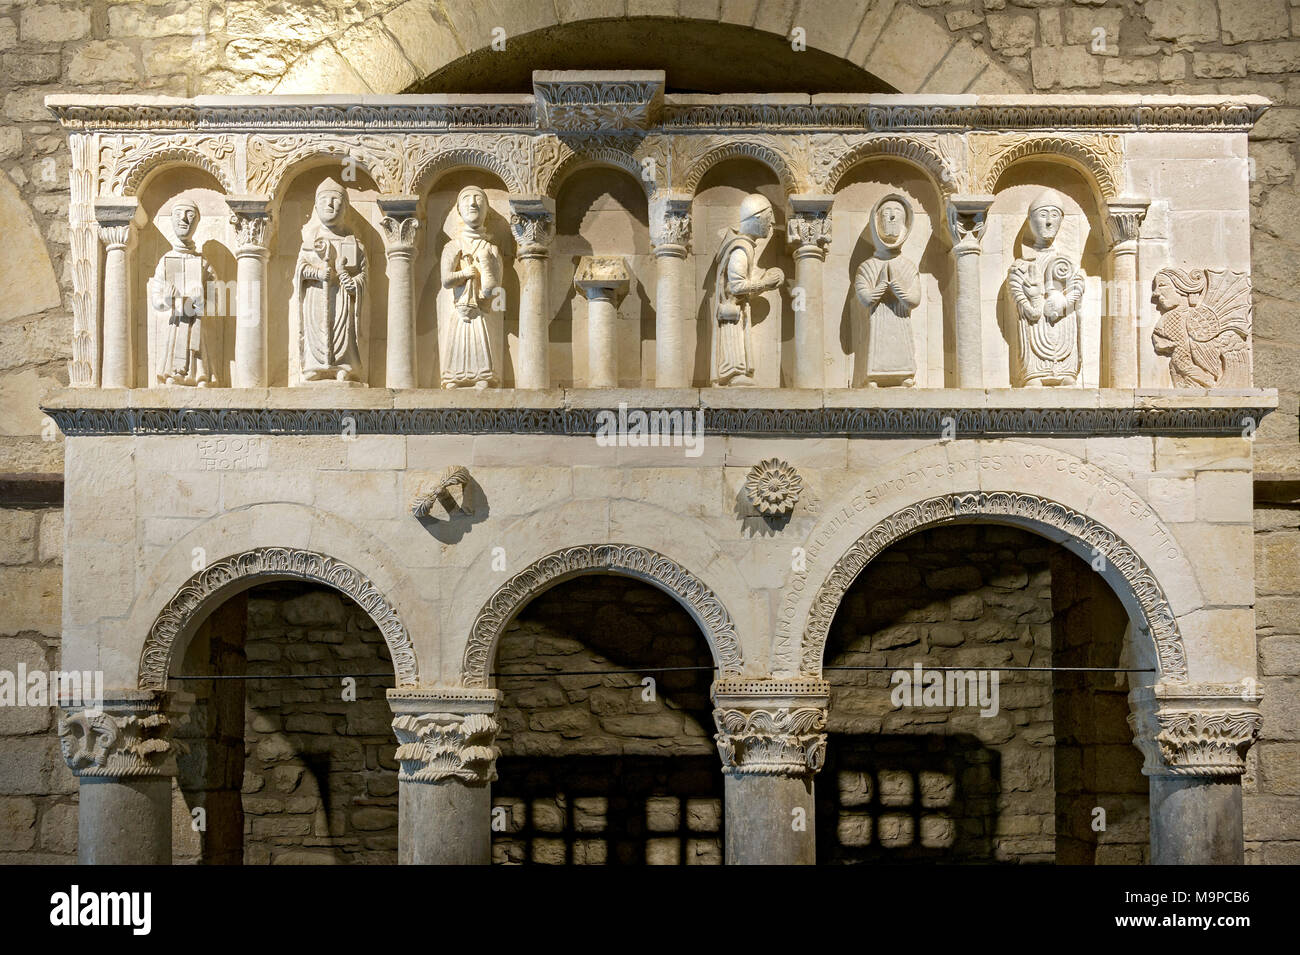 Pulpit with figures in a loggia, pilgrimage church, Chiesa Santa Maria del Canneto, pilgrimage site Stock Photo